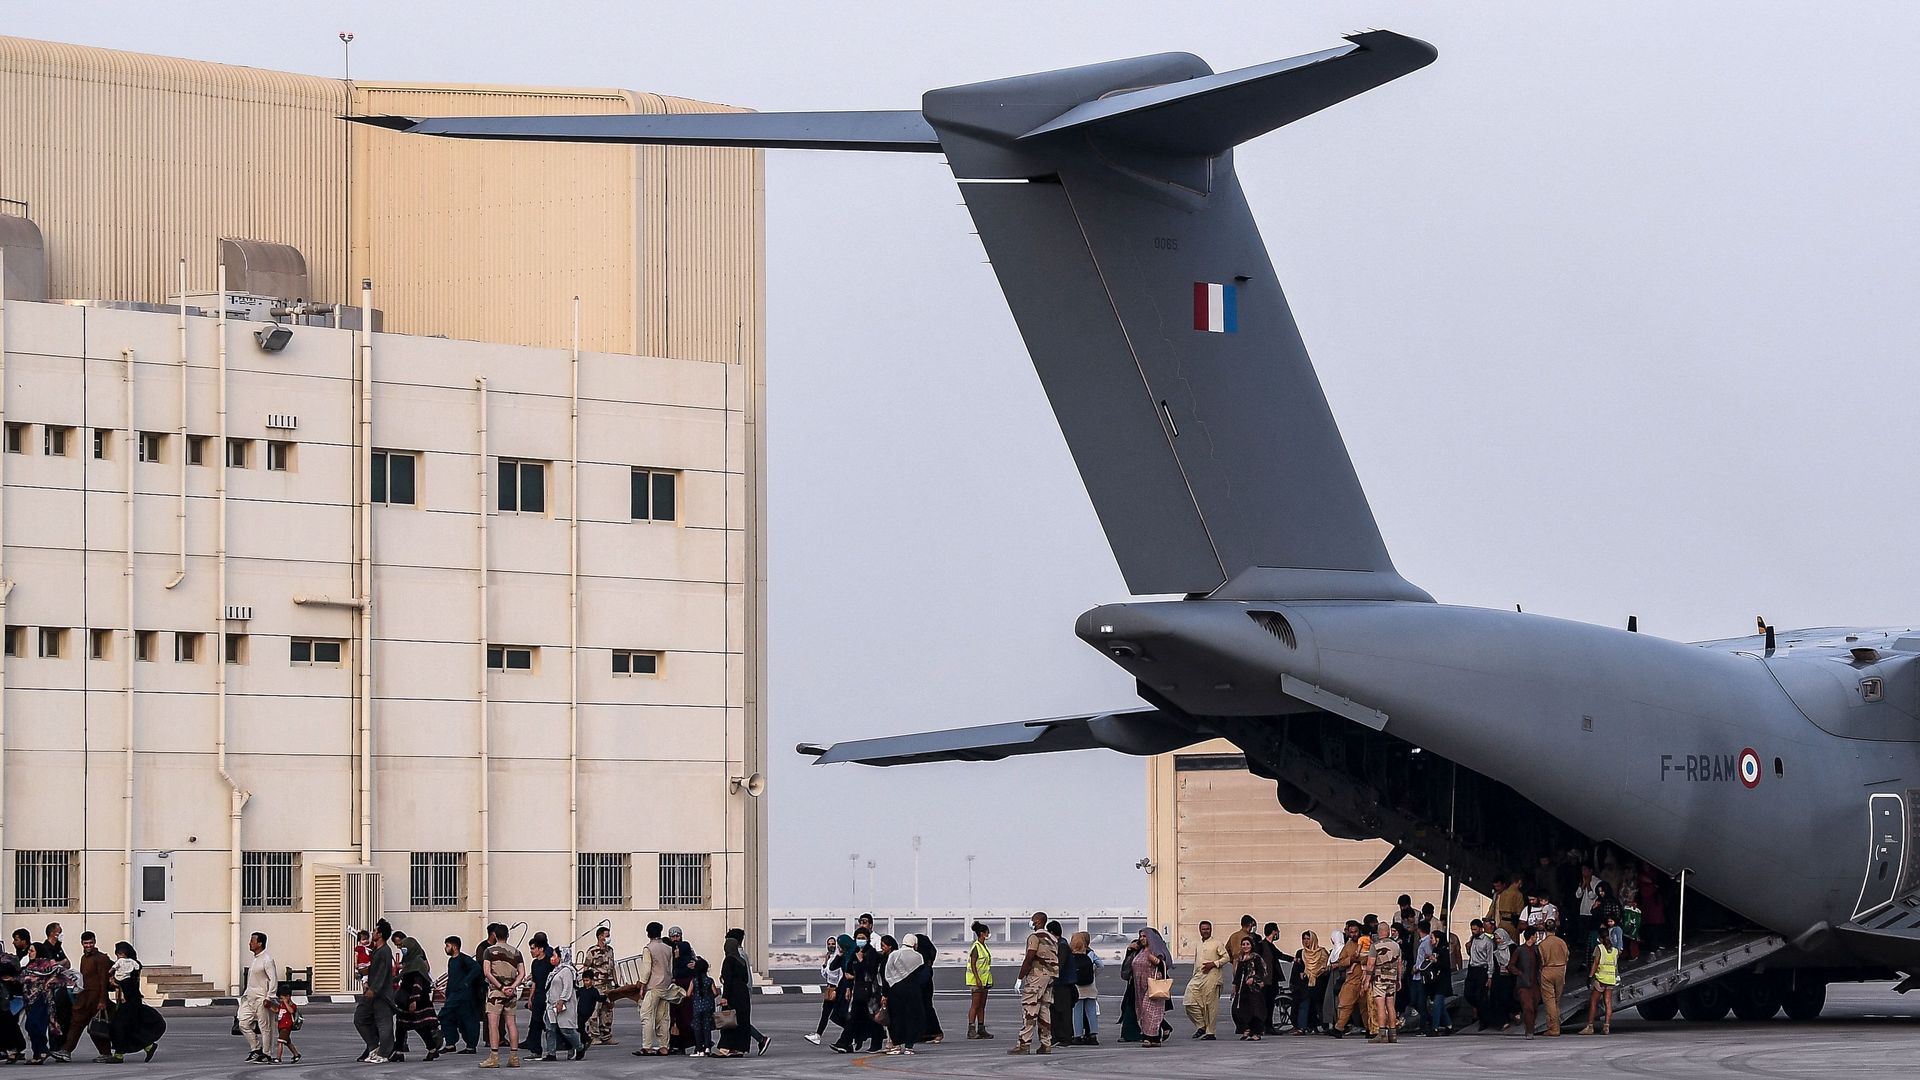 People disembark from a Airbus A400M military transport aircraft at the French military air base 104 of Al Dhafra, near Abu Dhabi, on August 23, after being evacuated from Kabul